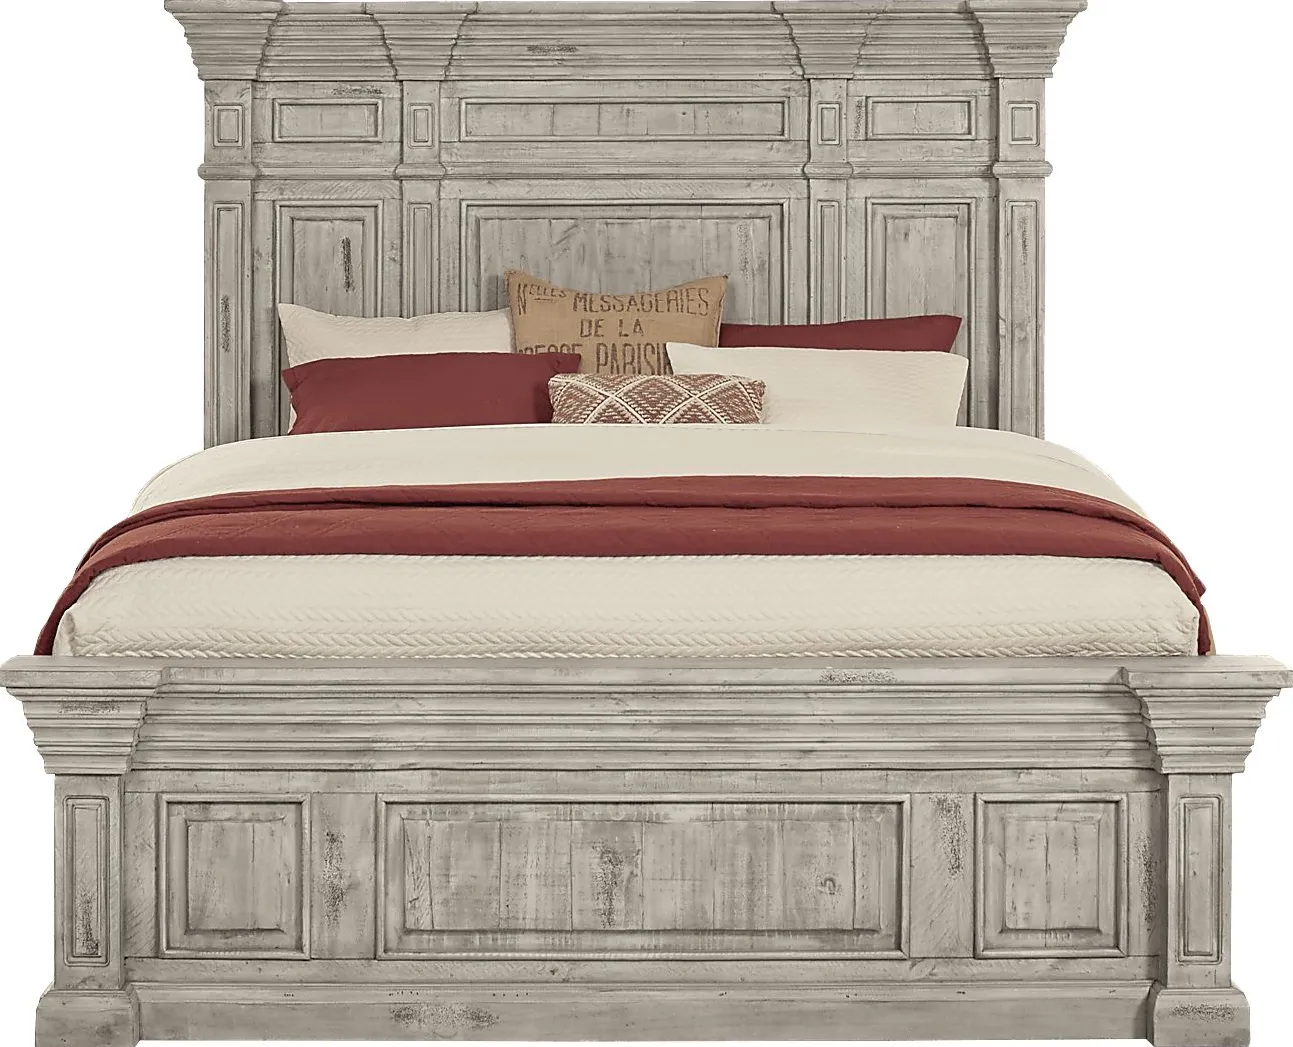 Pine Manor Gray 3 Pc King Panel Bed